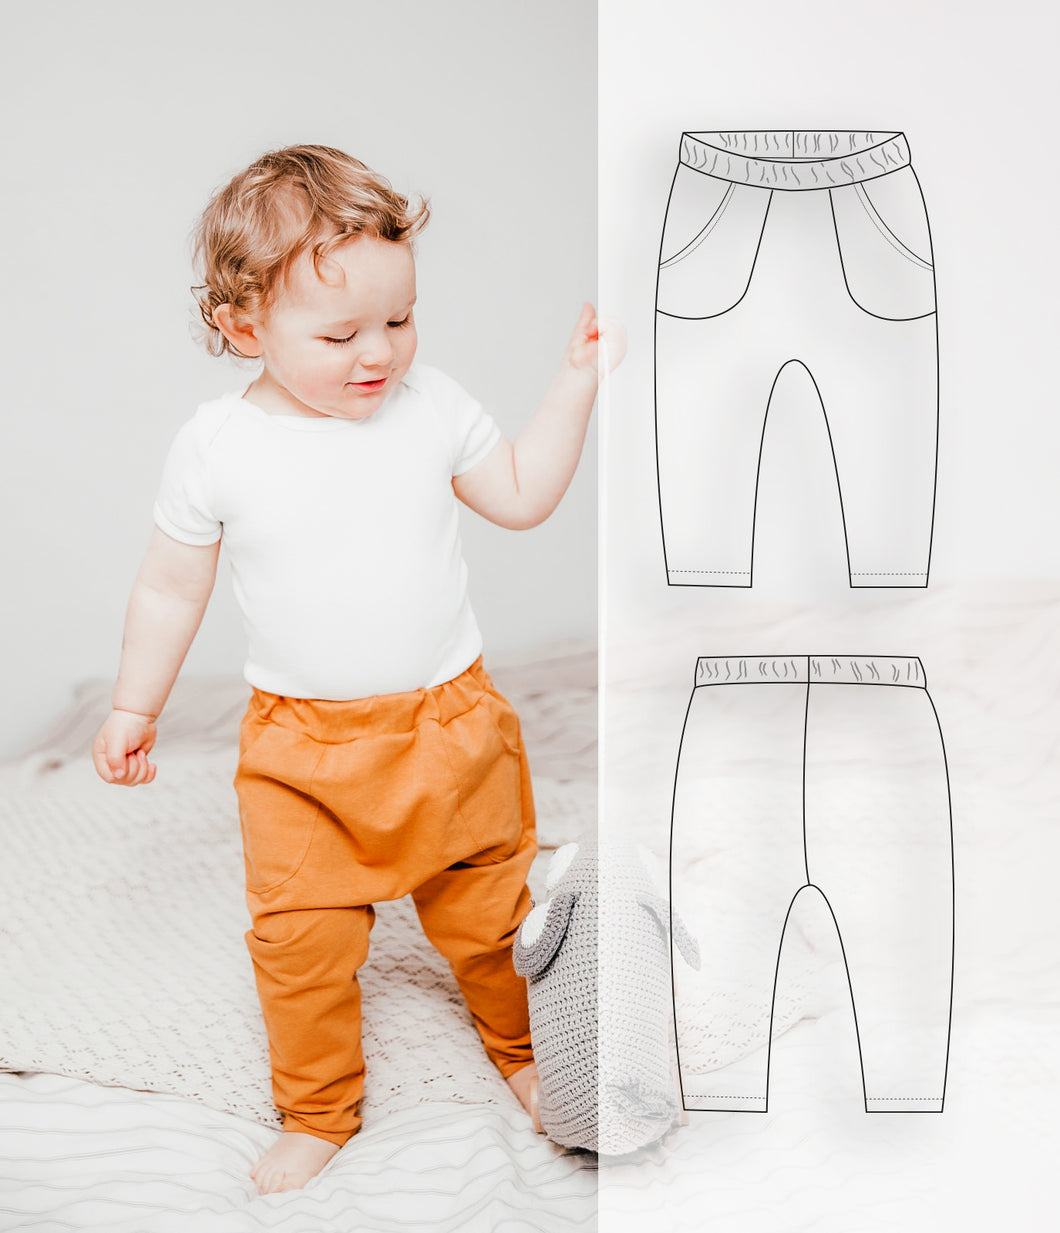 Kids Pants Tutorial with FREE Pattern! - YouTube